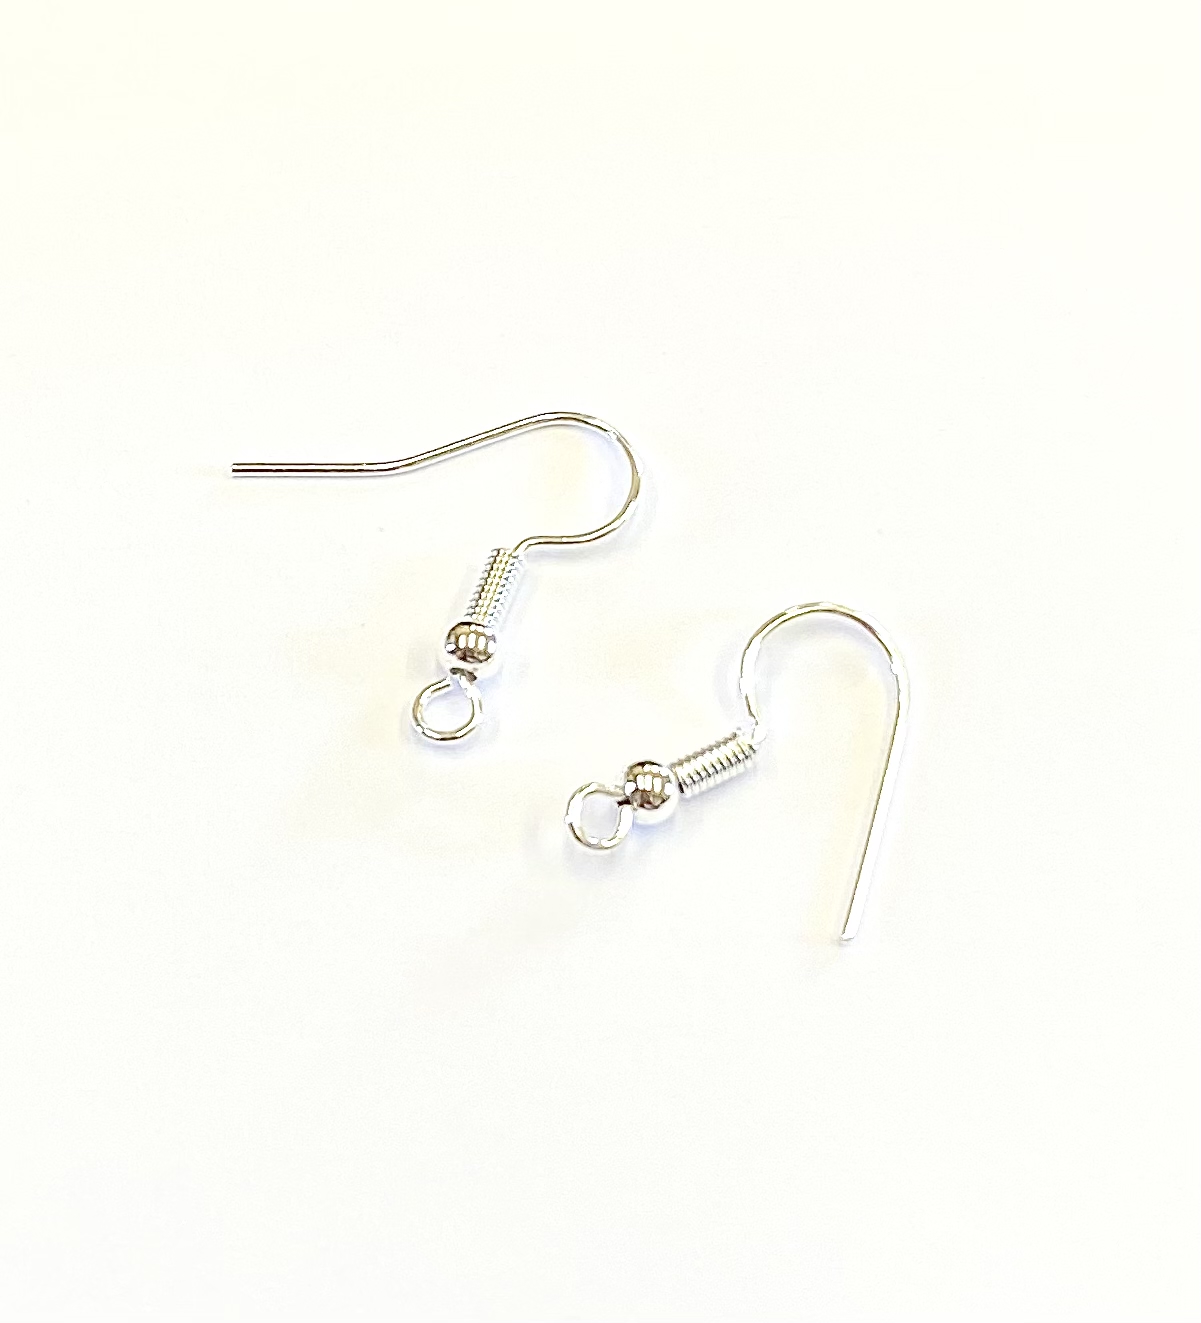 Silver Plated Fish Hook Earring Wires x 1 Pair